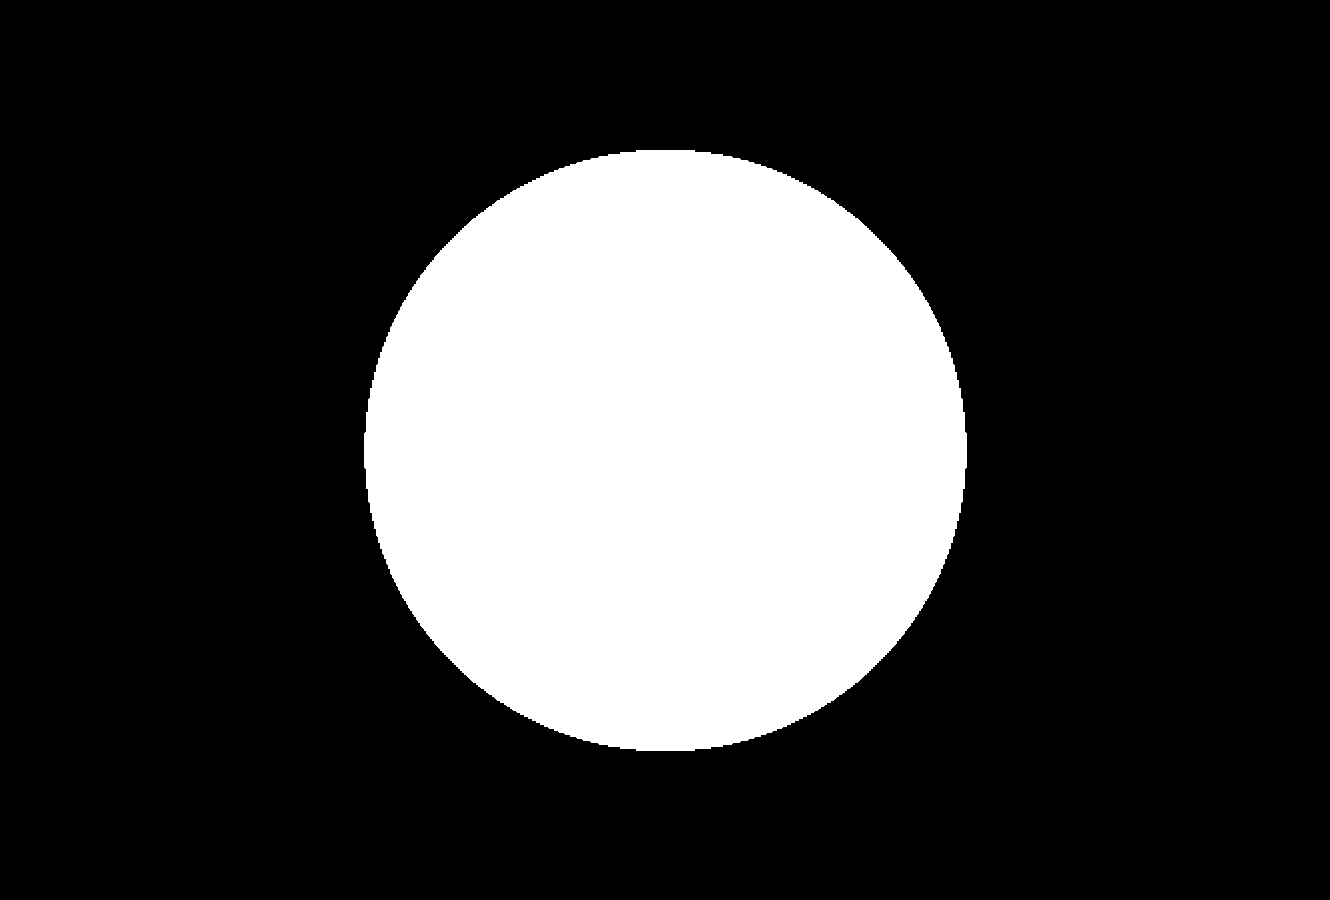 Binary mask with circle in the center